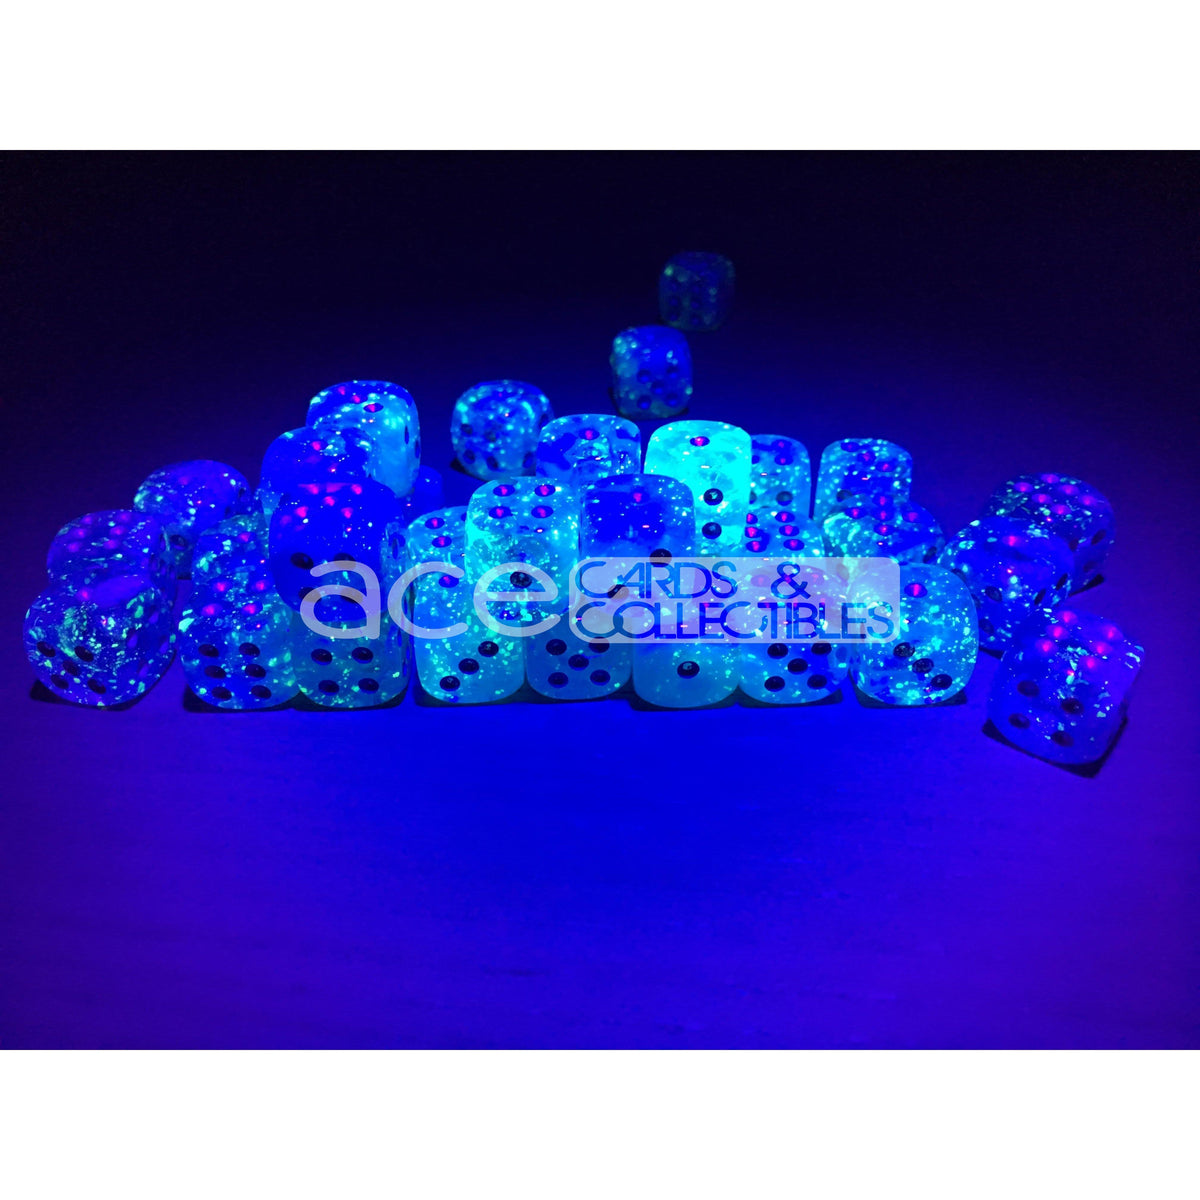 Chessex Luminary Glow in Dark 12mm d6 Dice (Sky) (Loose)-Chessex-Ace Cards &amp; Collectibles